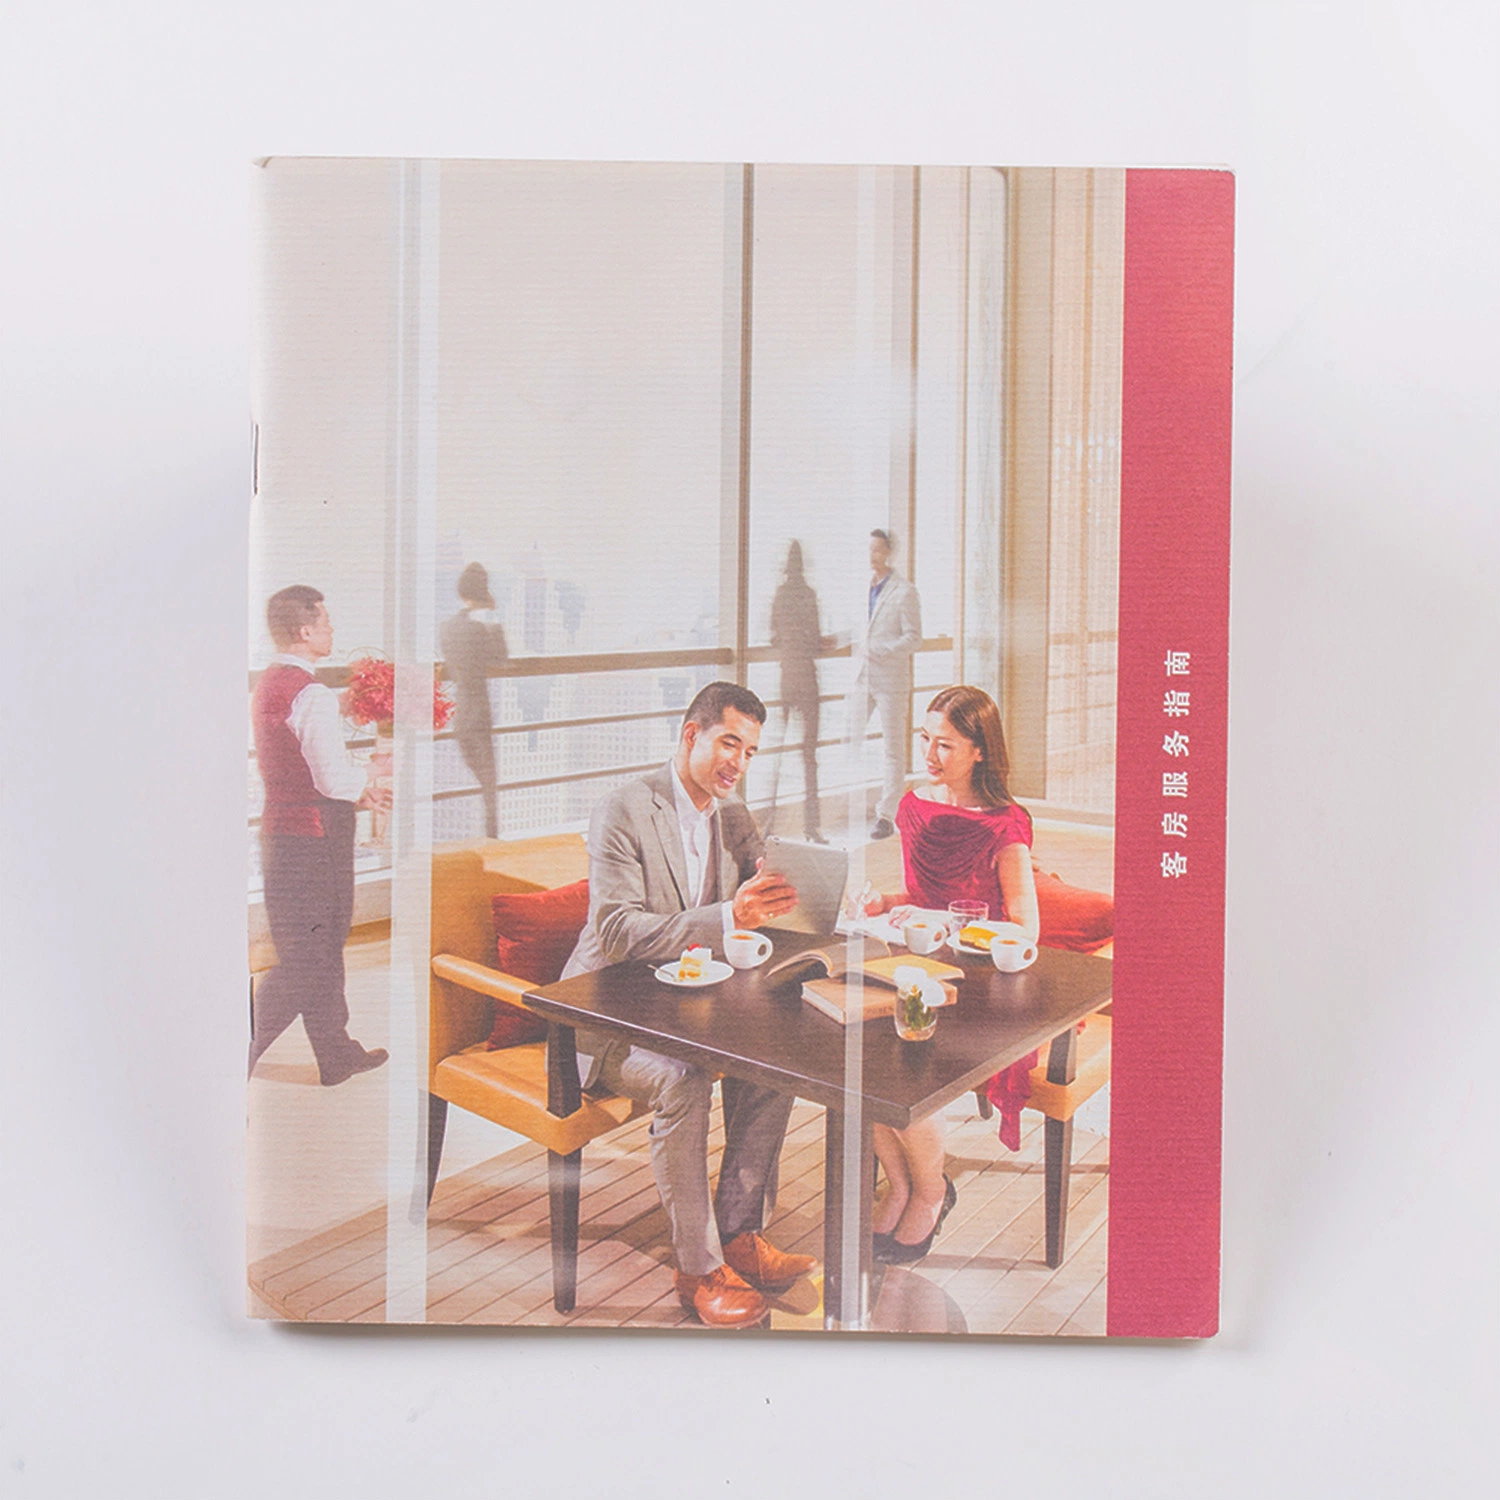 Cusomized High Quality Product Promotion Catalog Note Book Broschürendruck